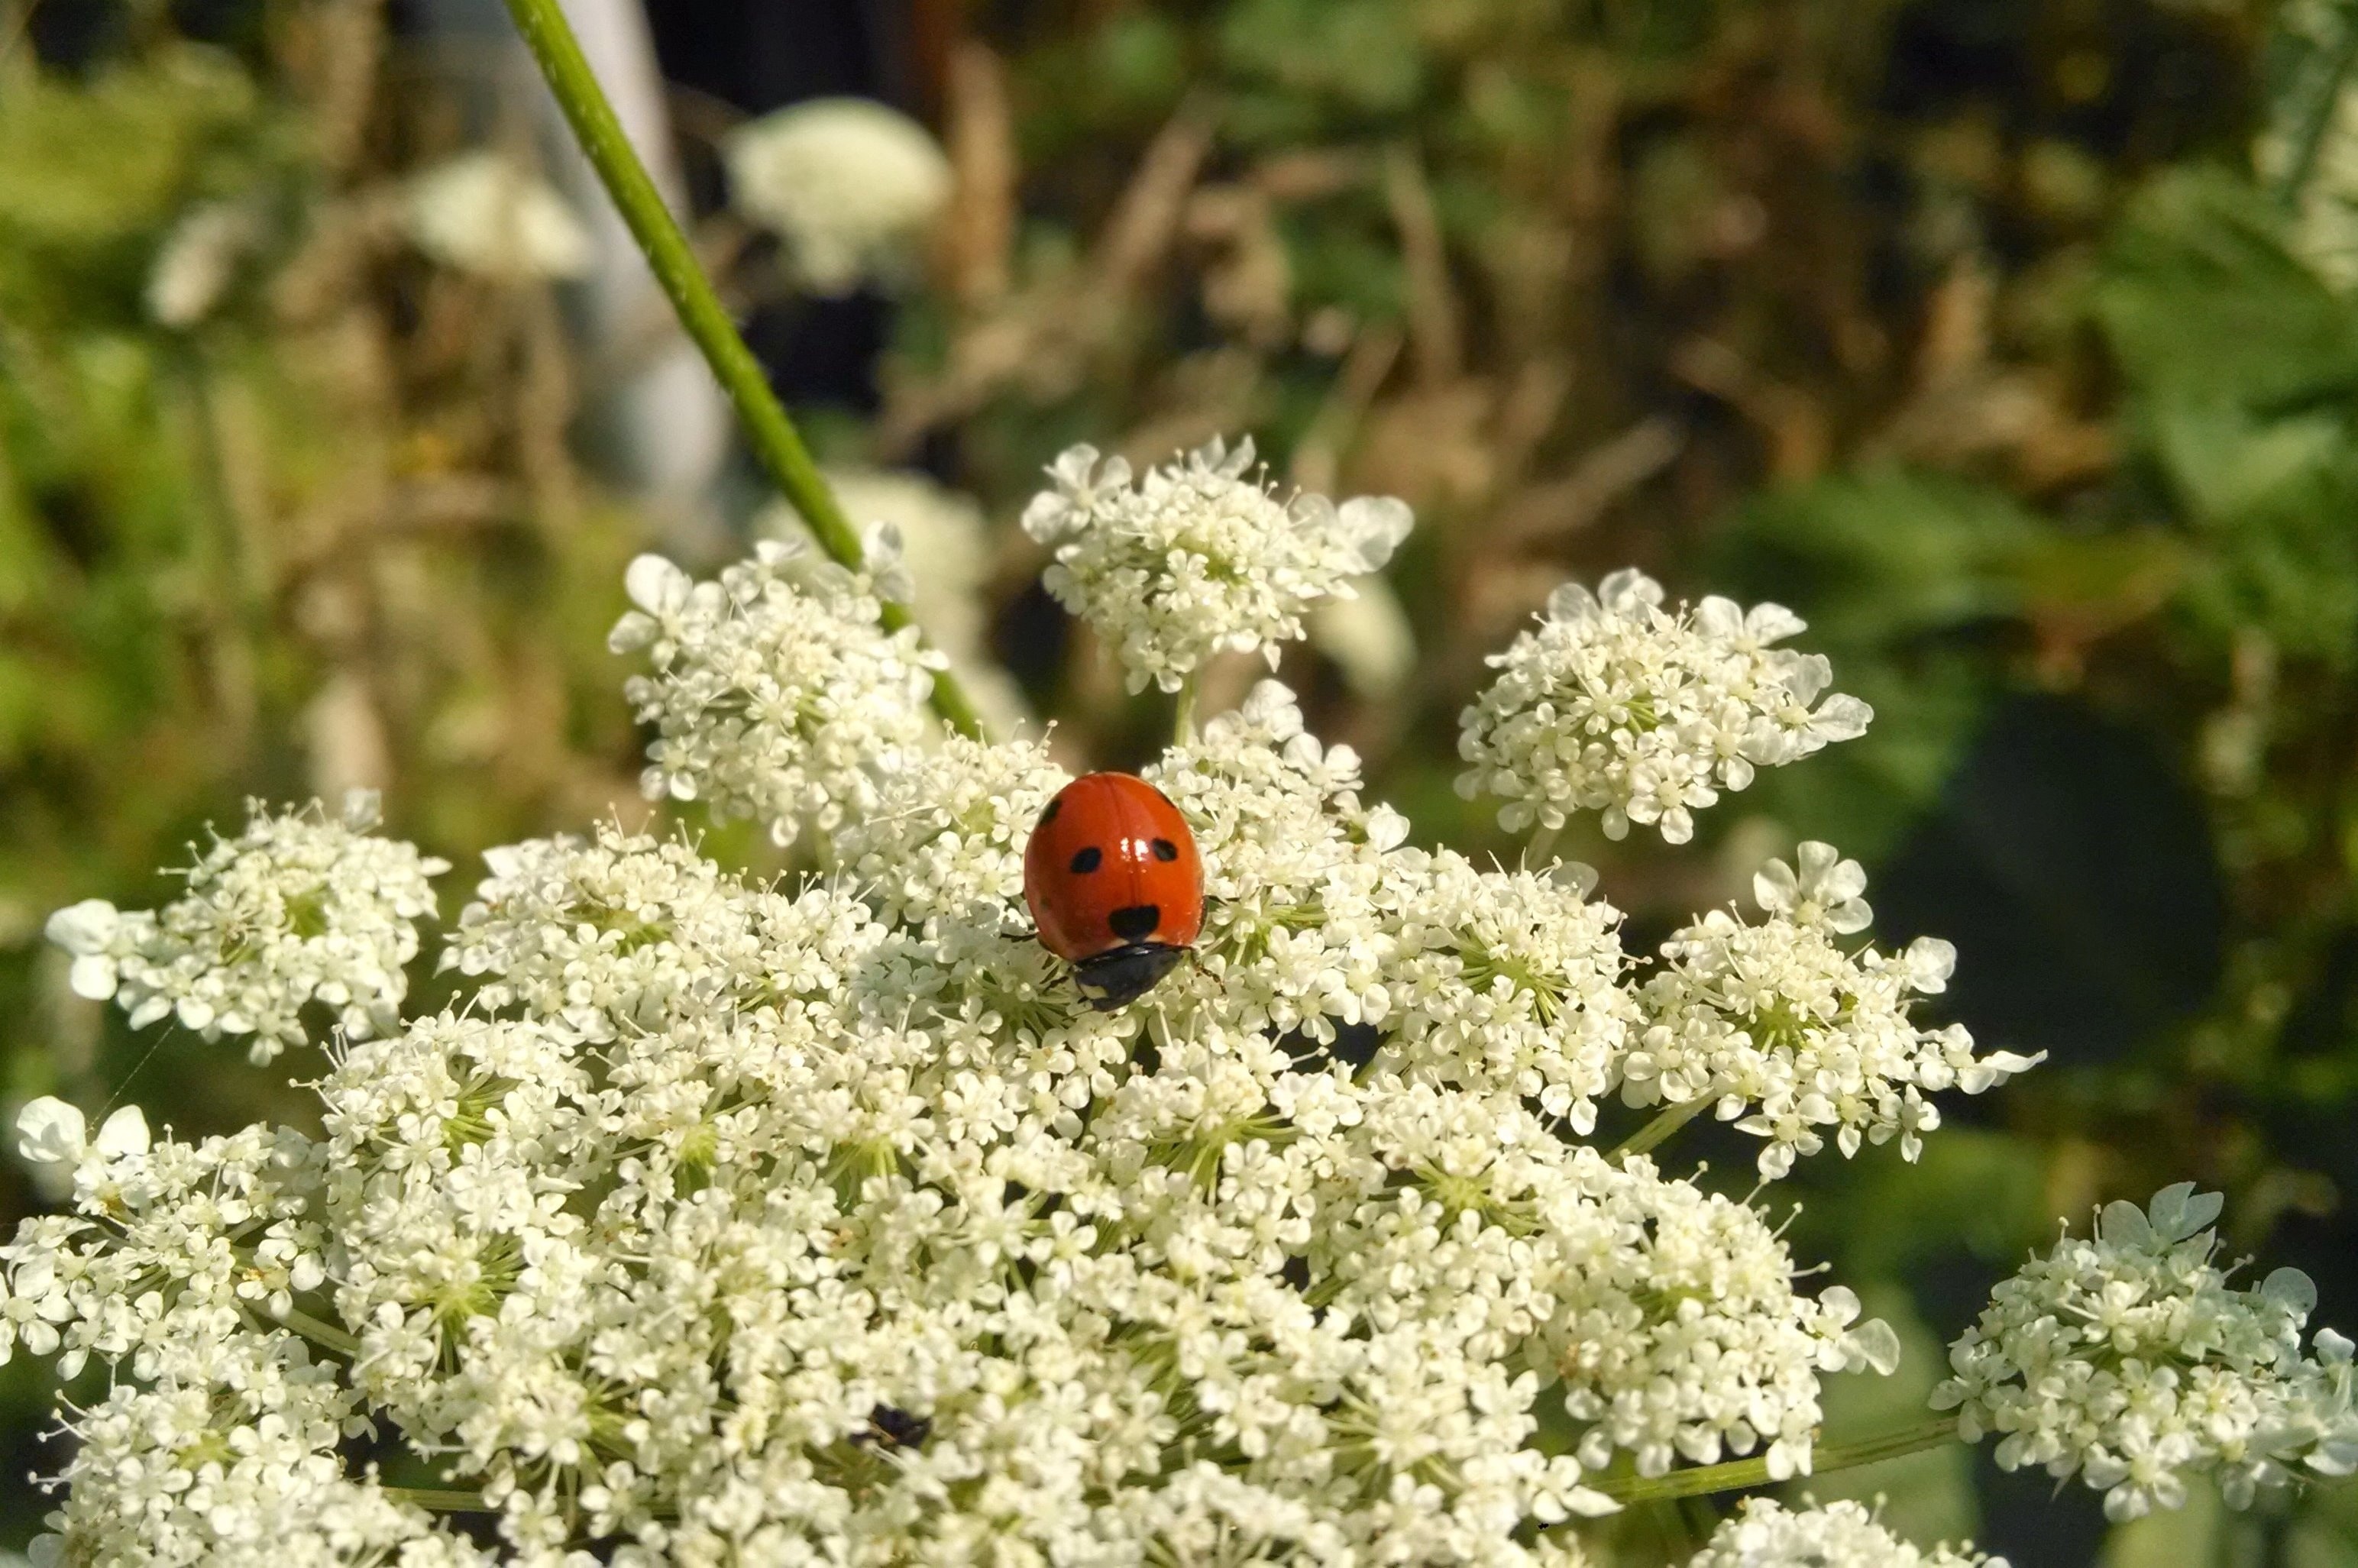 Flower, Insect, Ladybug, Outdoor, Red, animals in the wild, insect